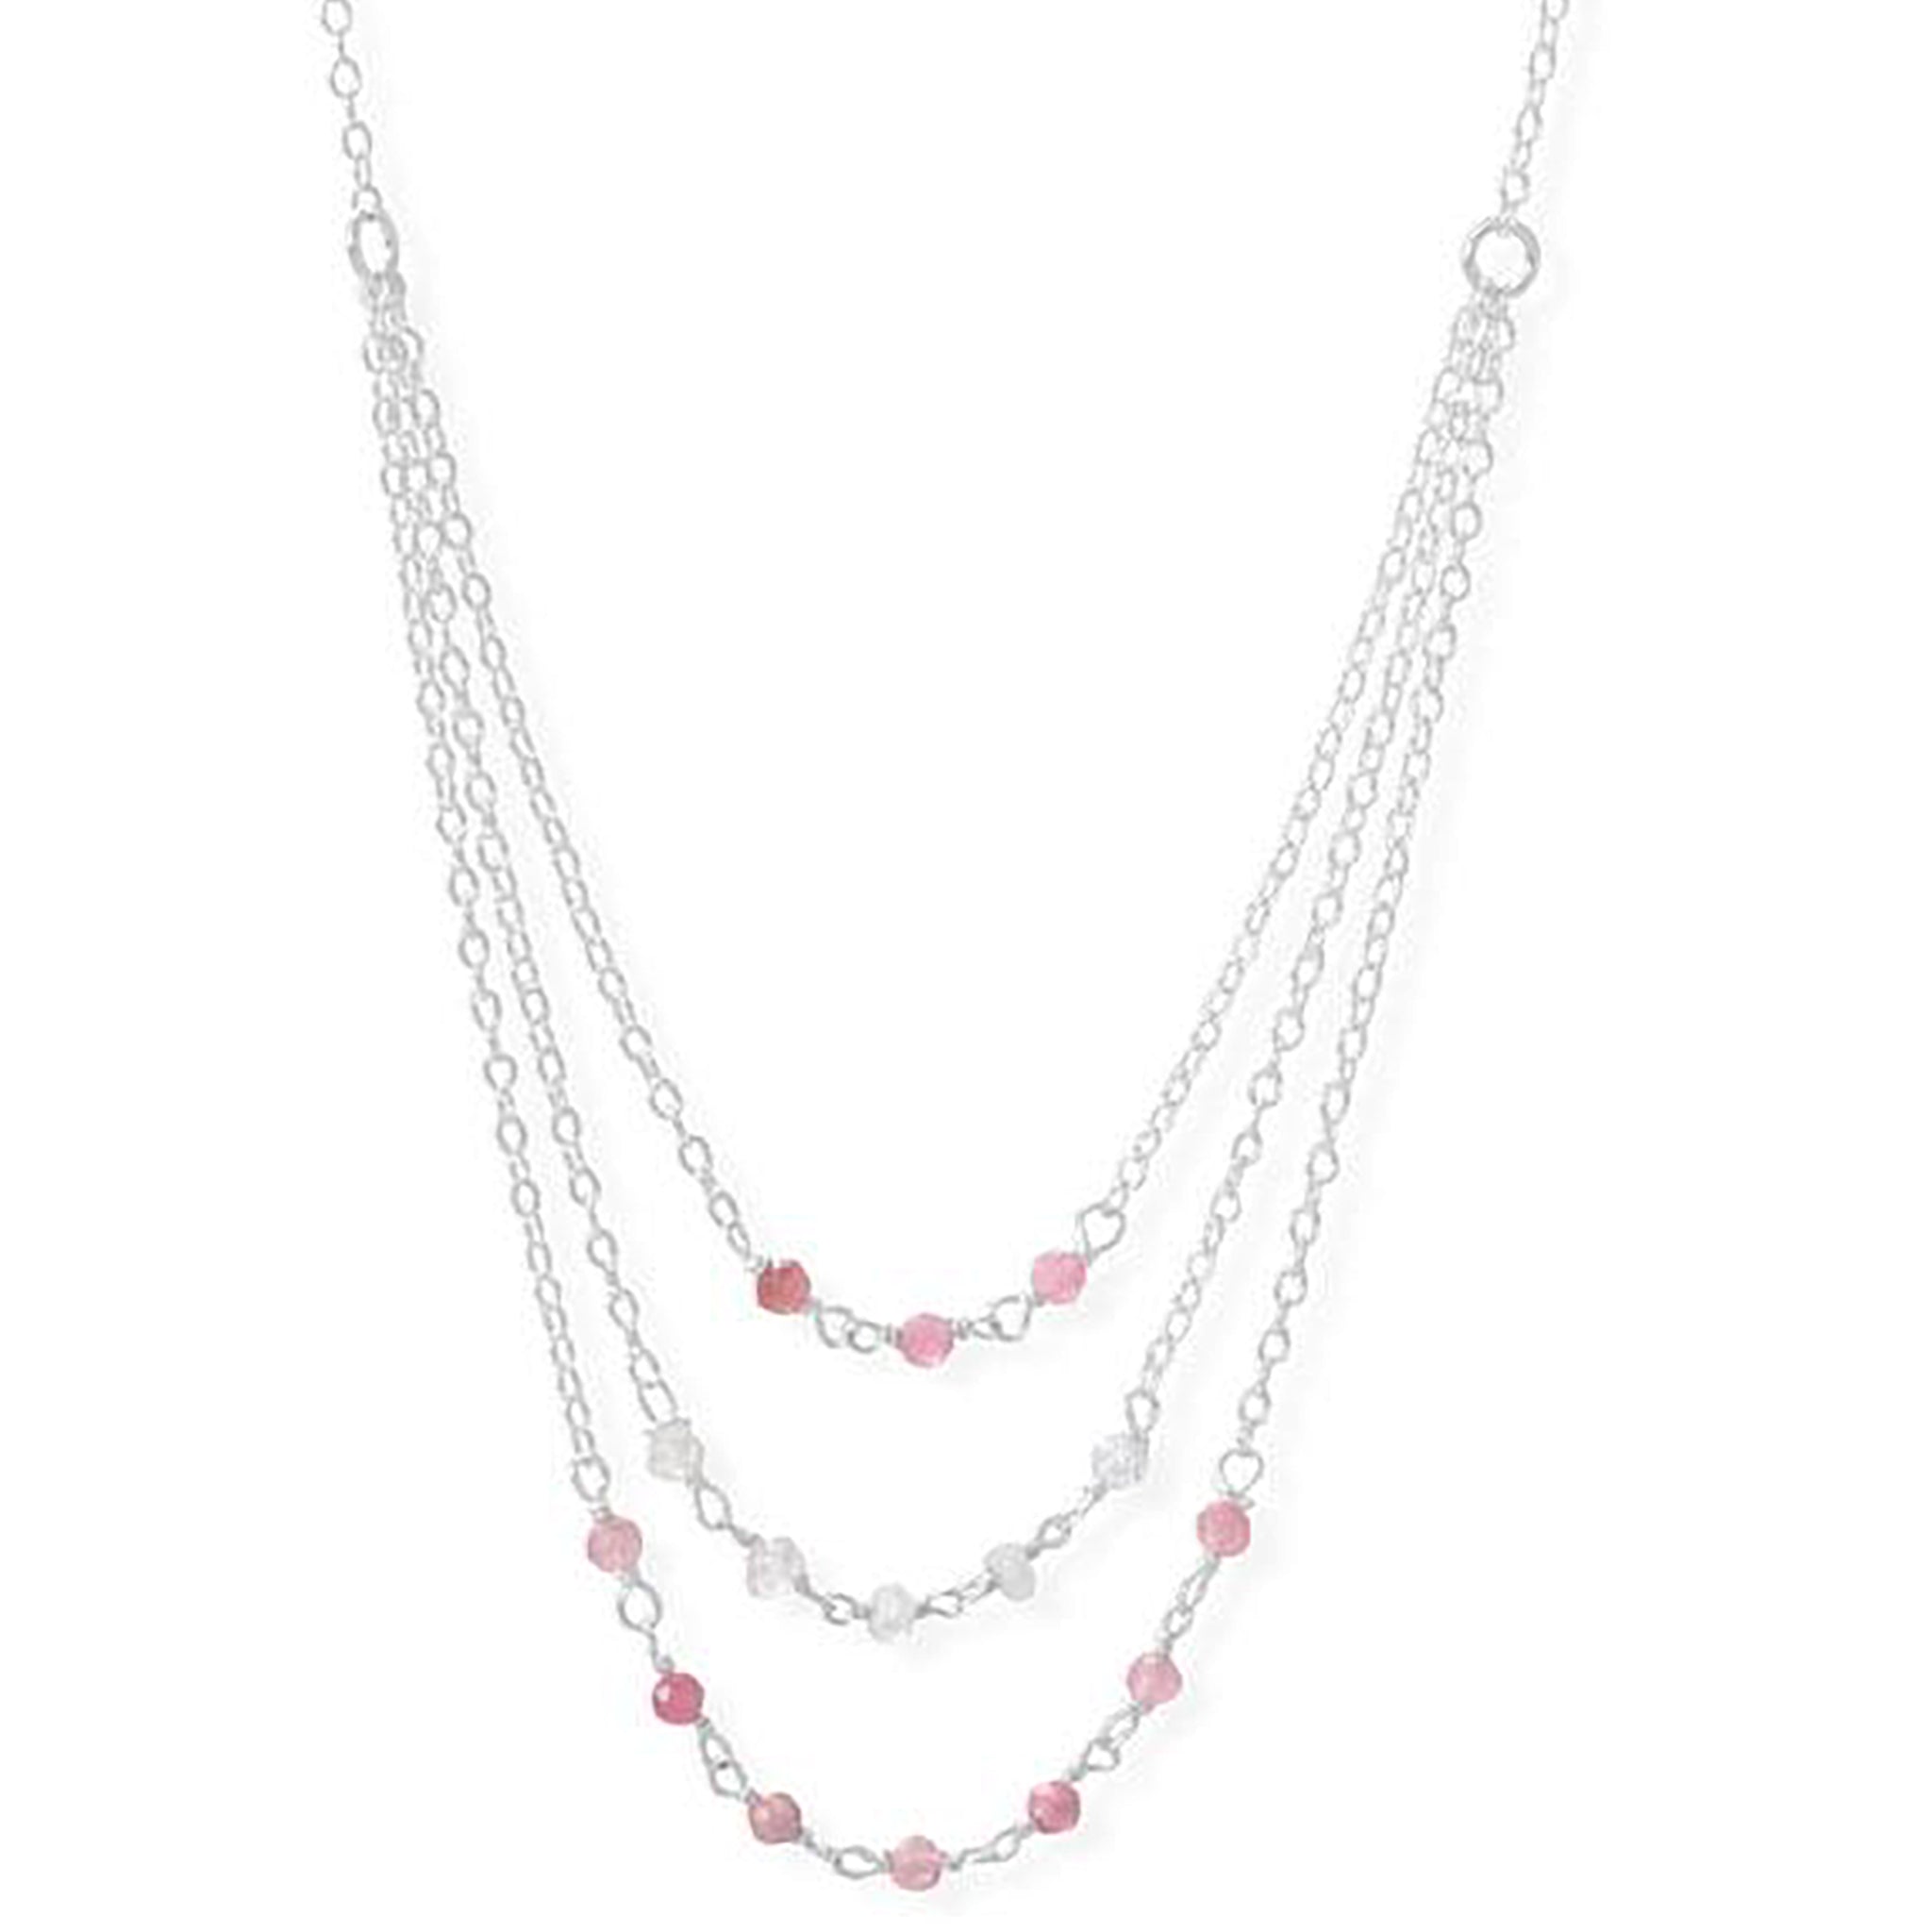 Tourmaline and Moonstone Bead Necklace